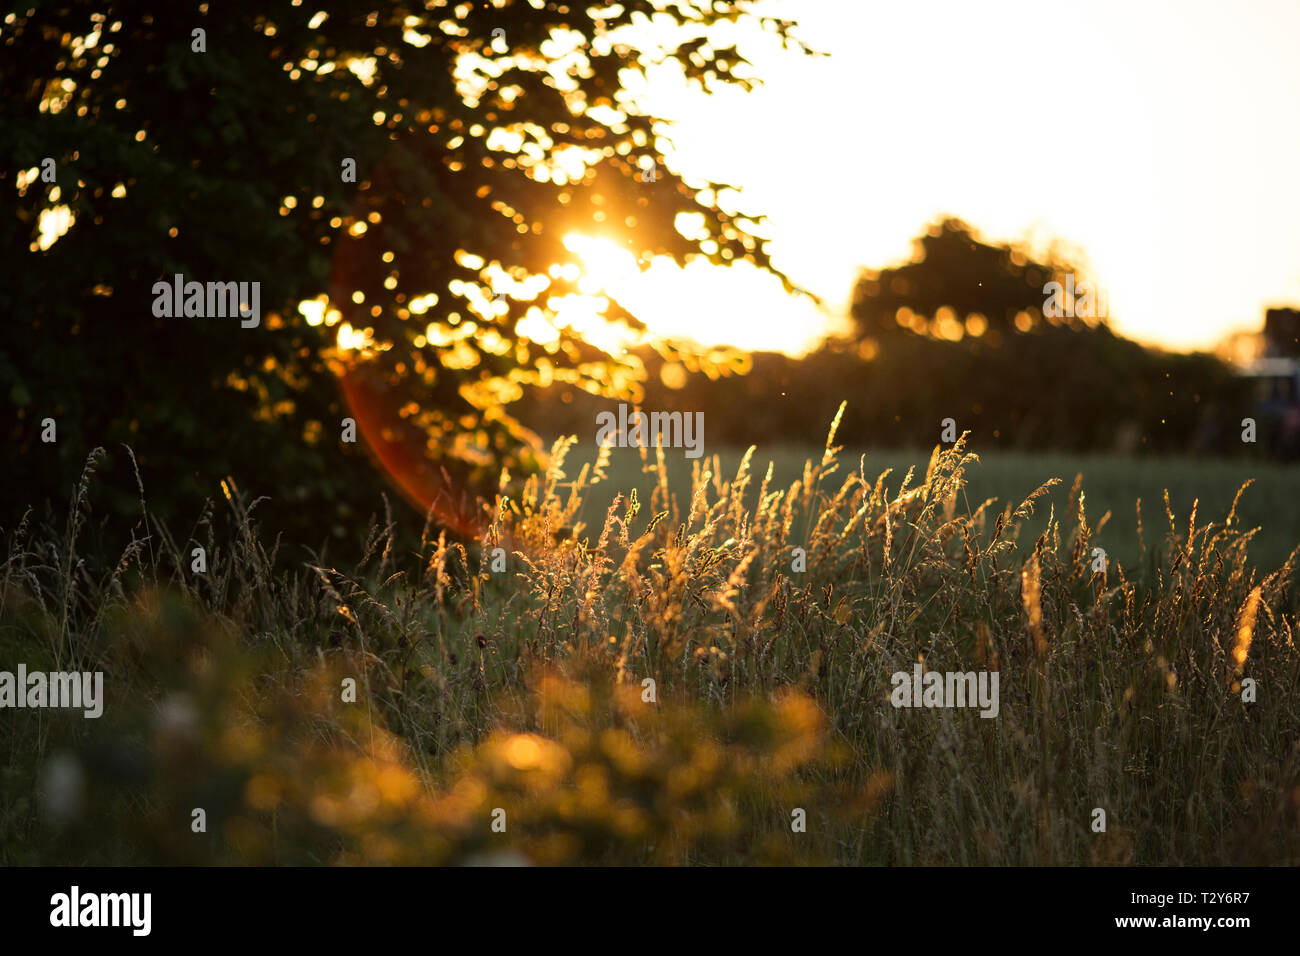 Sun shining through the grasses at golden hour in Nexo on the island of Bornholm in Denmark. Stock Photo